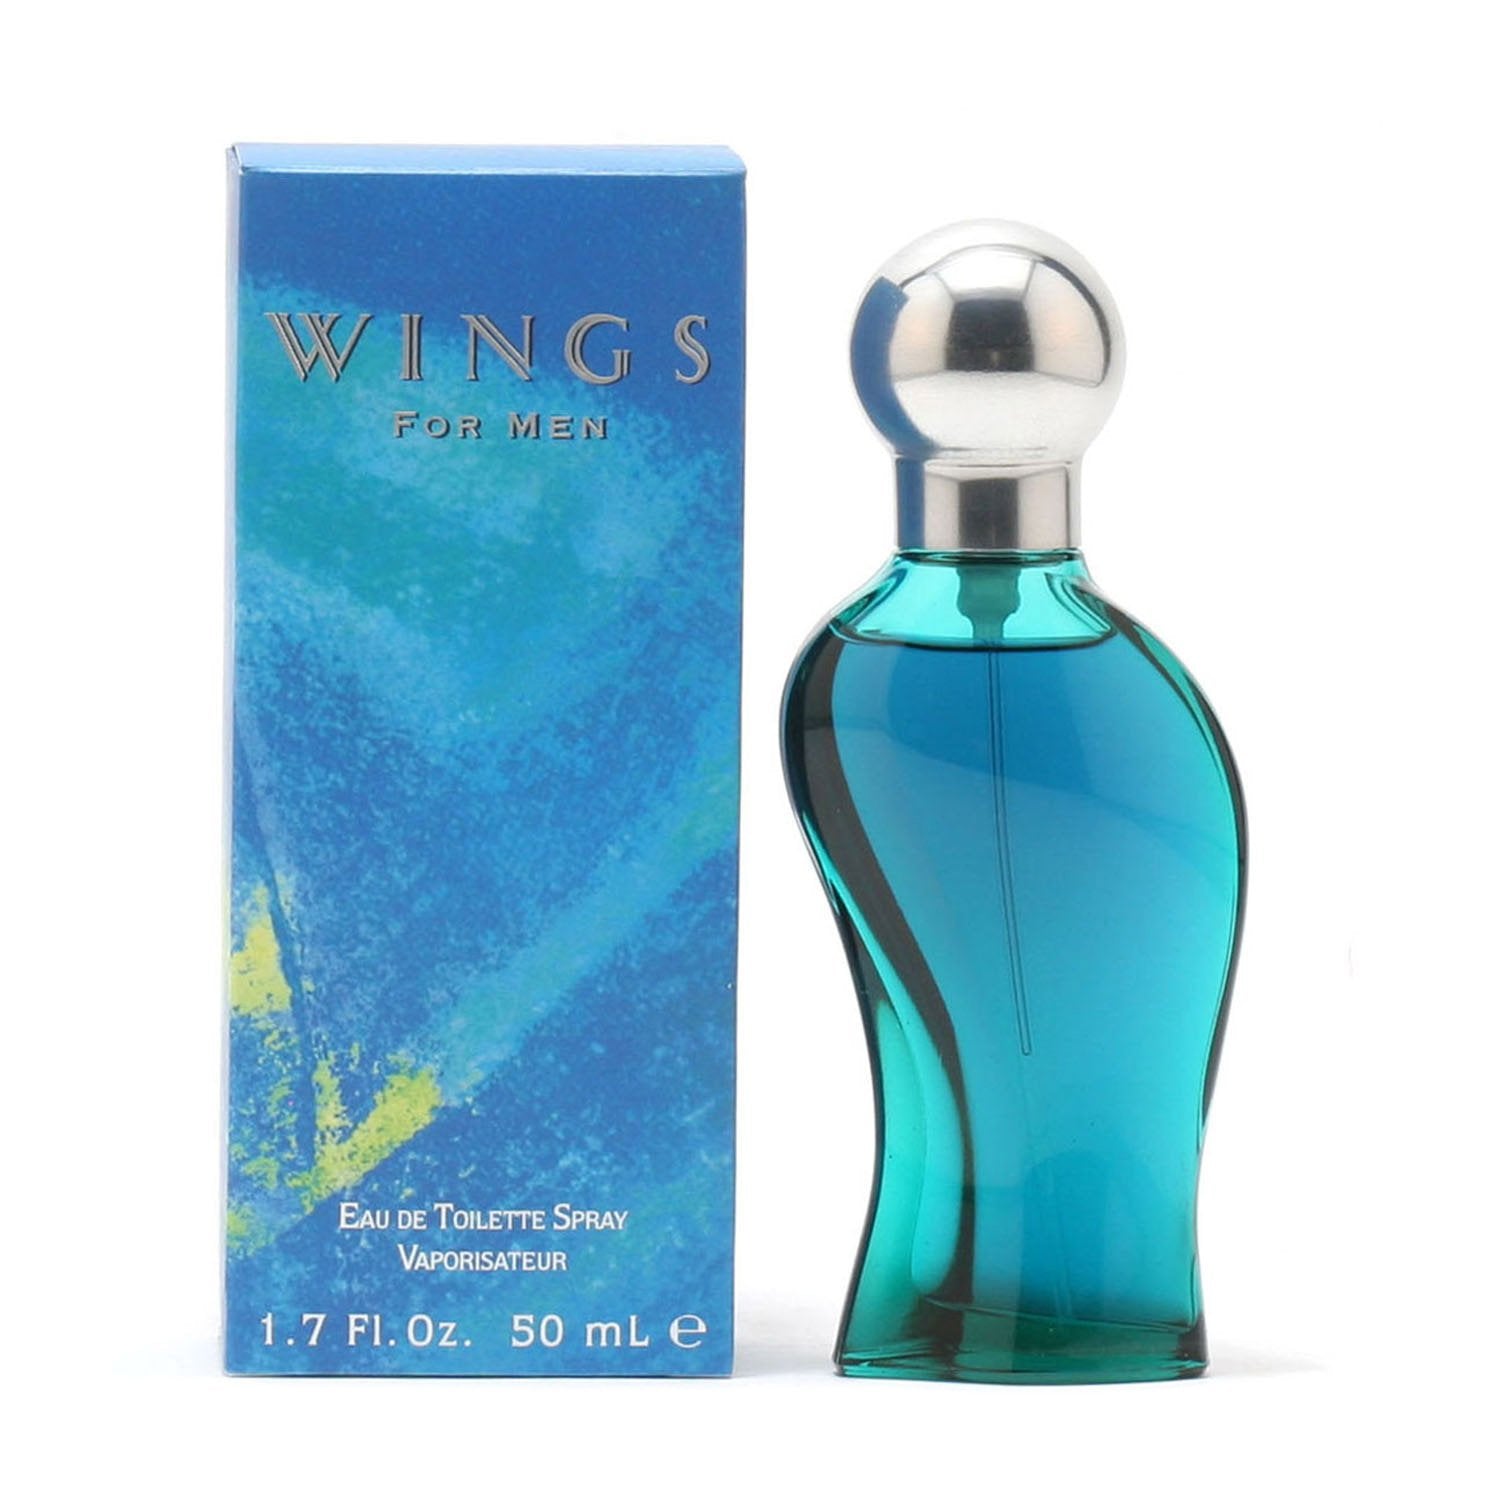 Fashion & Fragrance for men and women